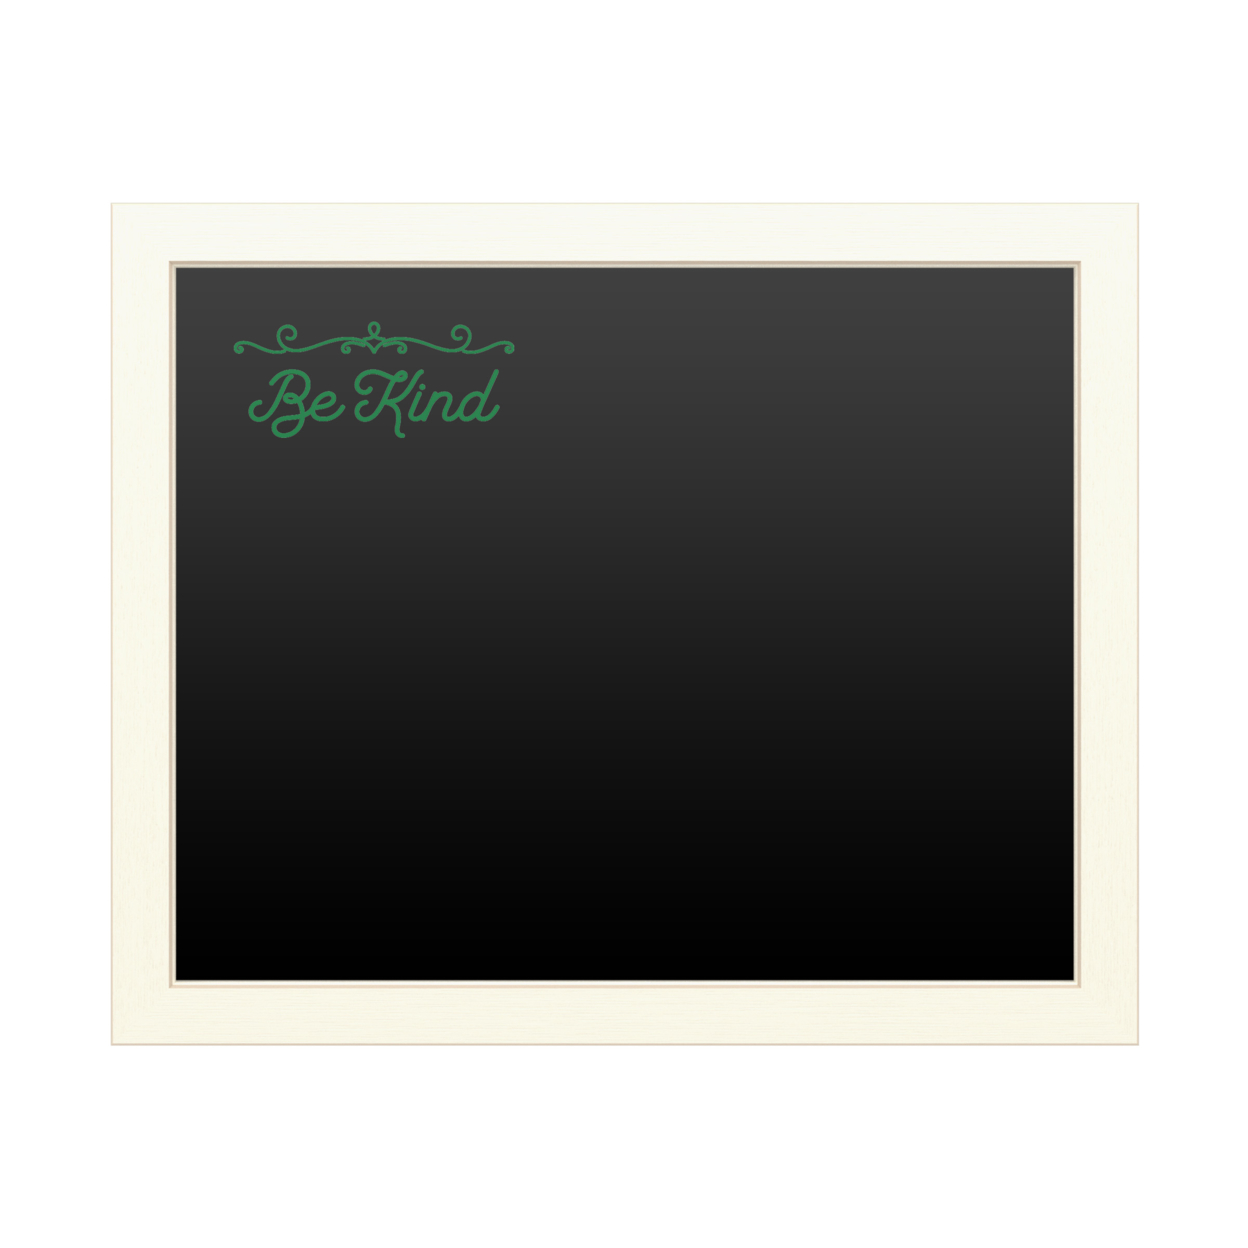 16 X 20 Chalk Board With Printed Artwork - Be Kind Script Green White Board - Ready To Hang Chalkboard